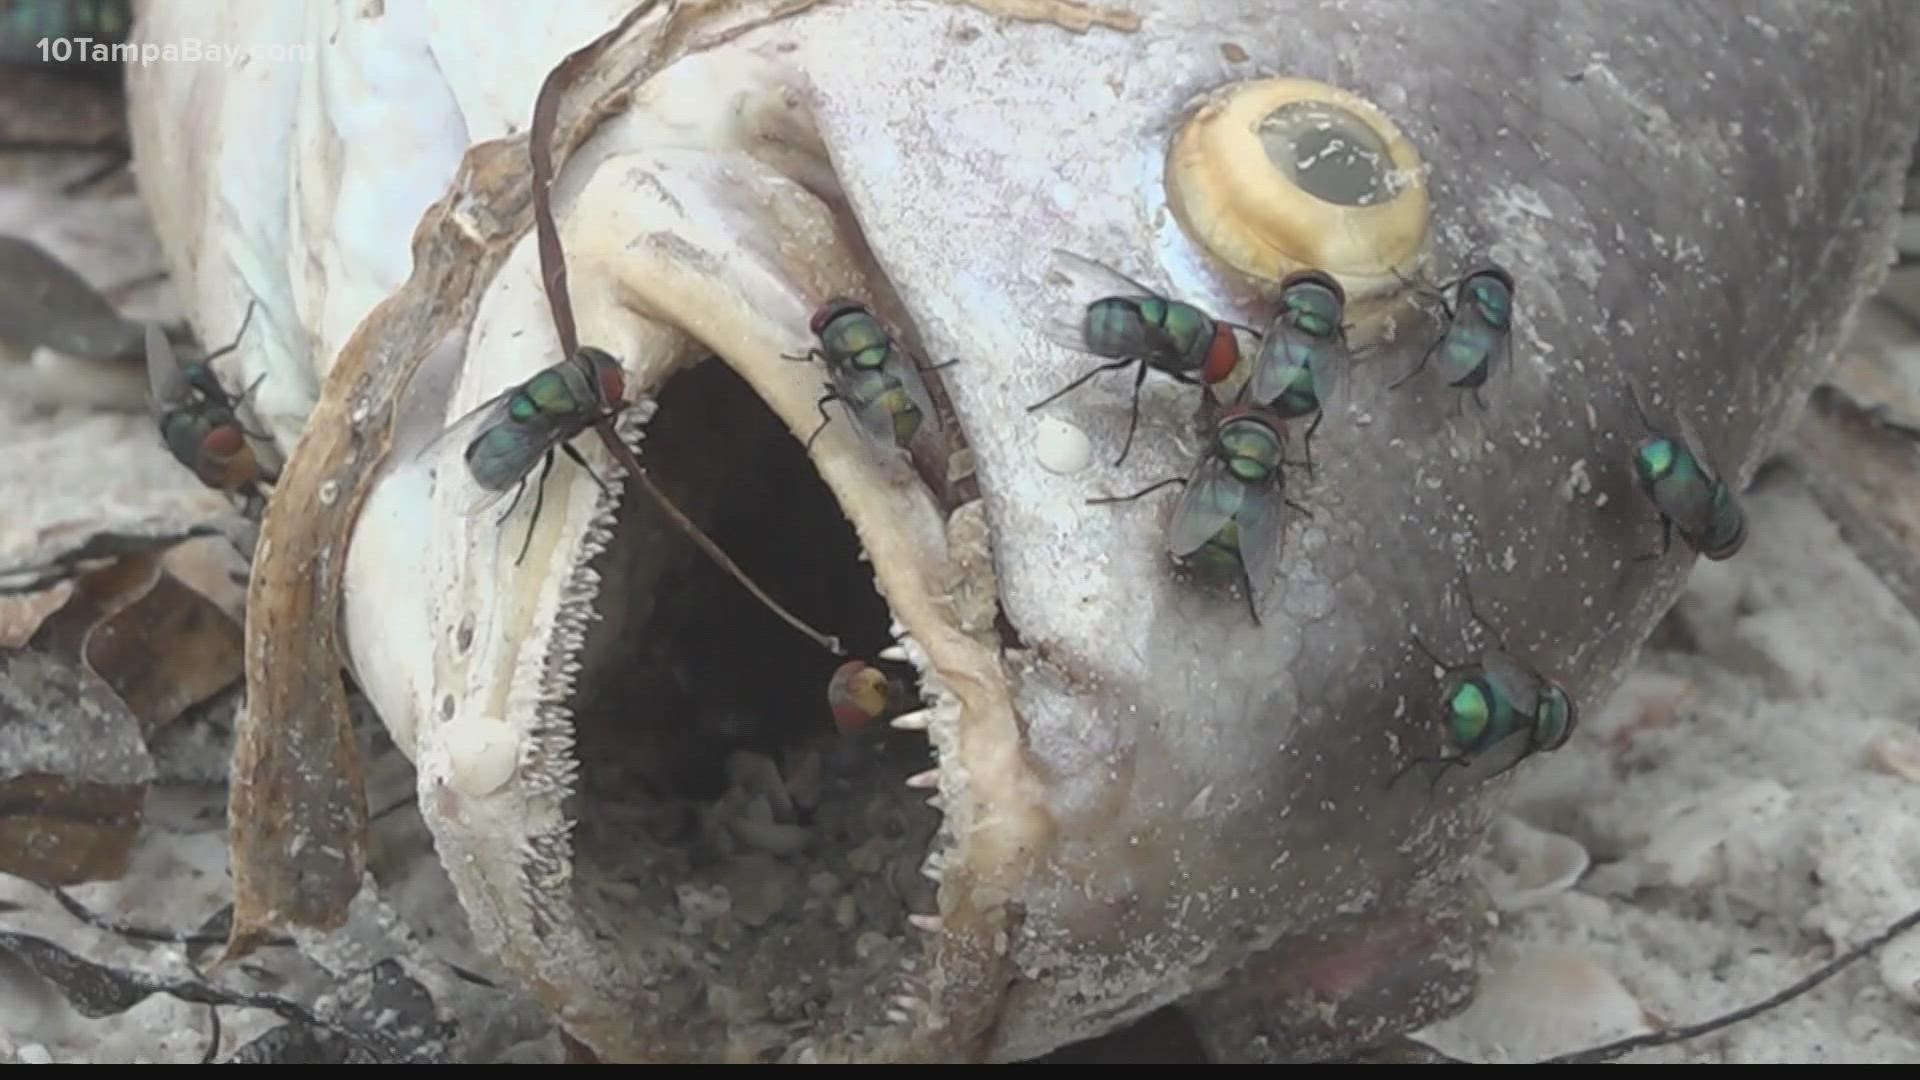 Entomologists from the University of Florida collected around 1,000 flies along the Pinellas County beaches Wednesday.